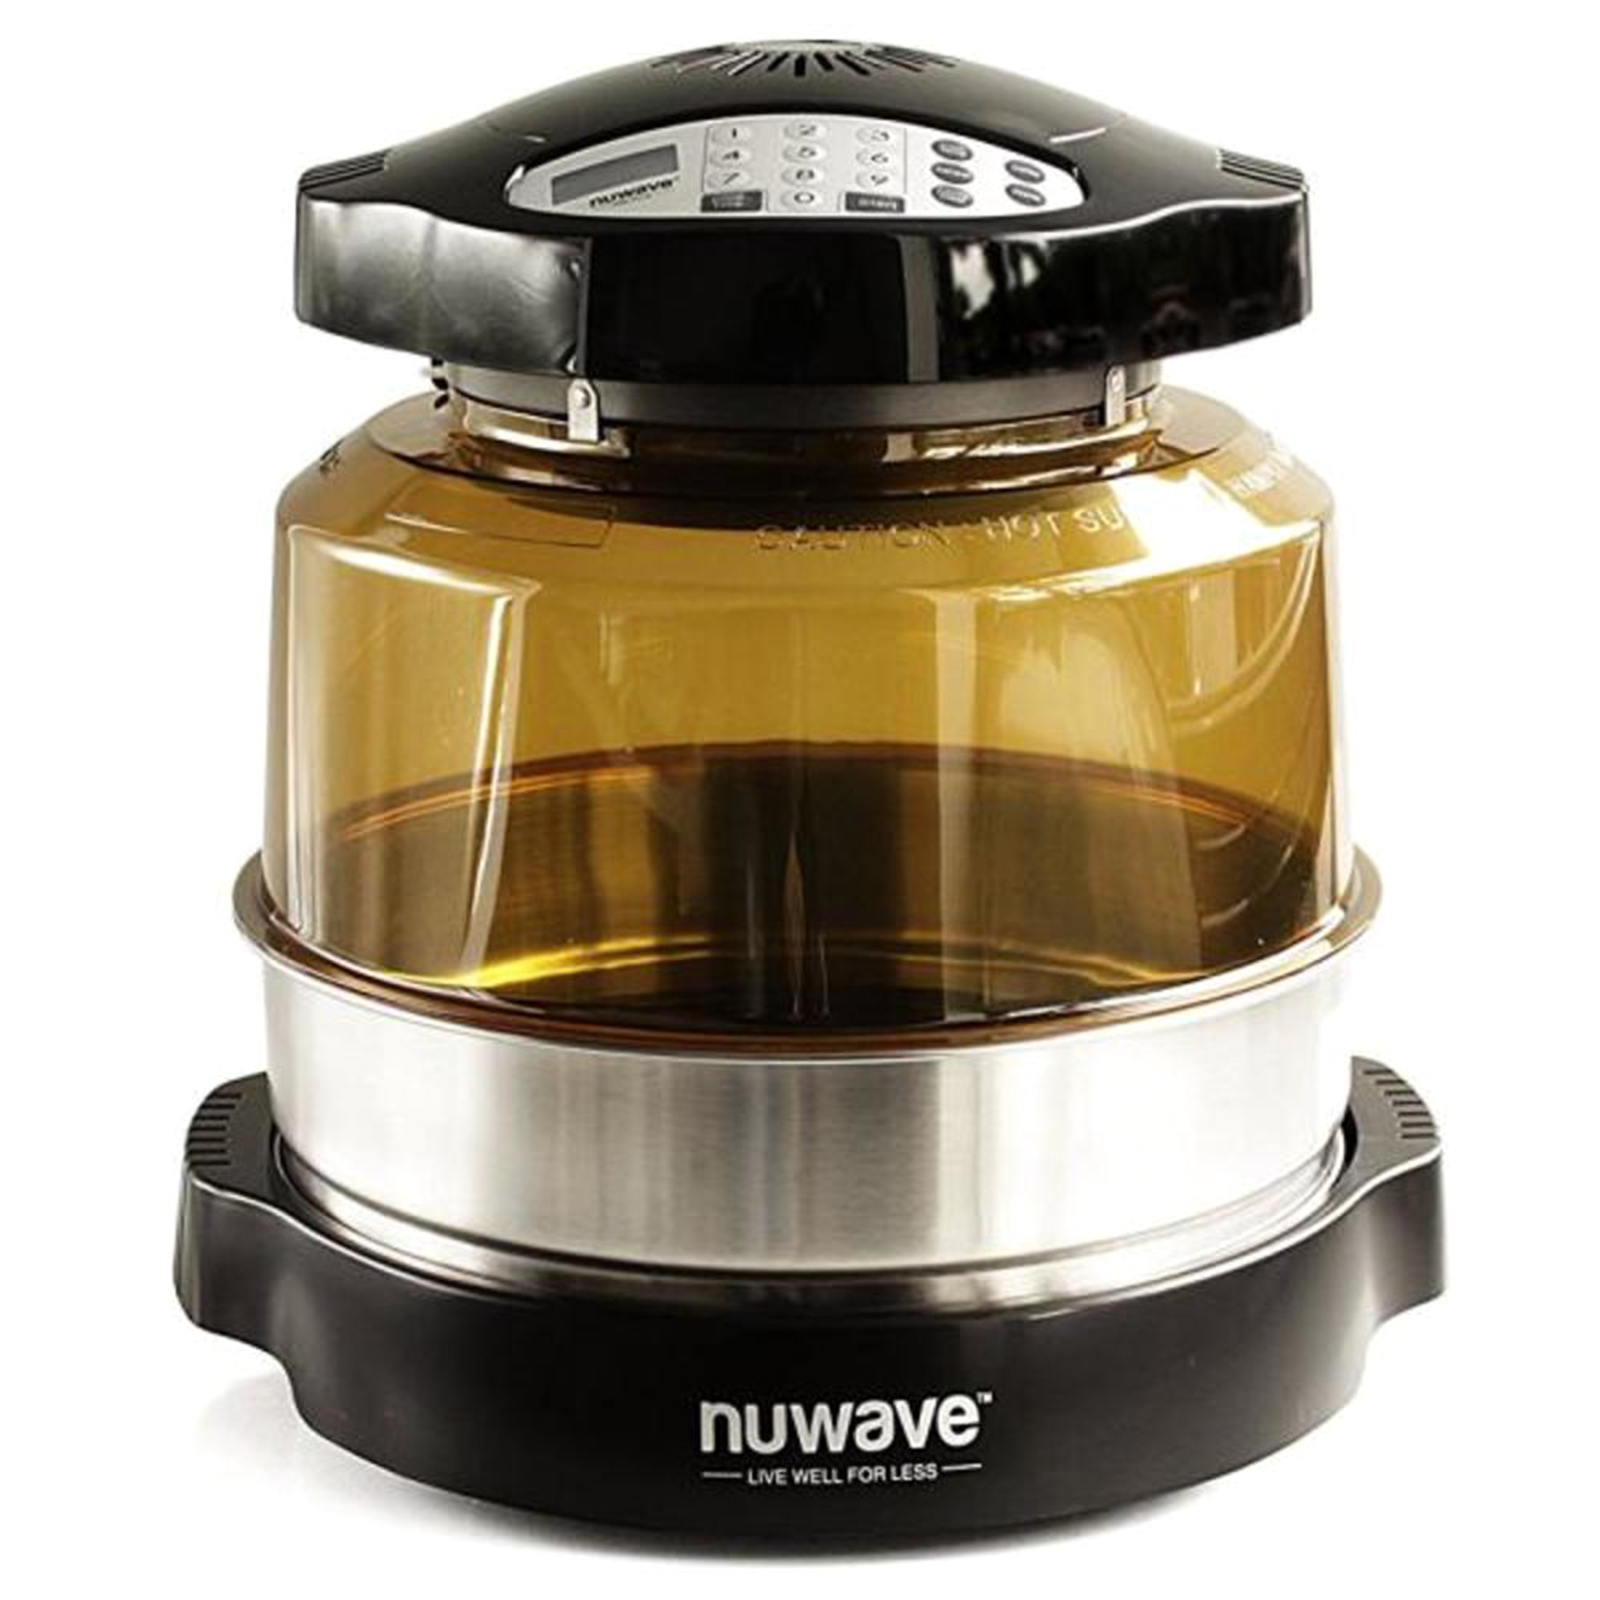 Nuwave 20632 20633 Pro Plus Oven with Stainless Steel Extender Ring